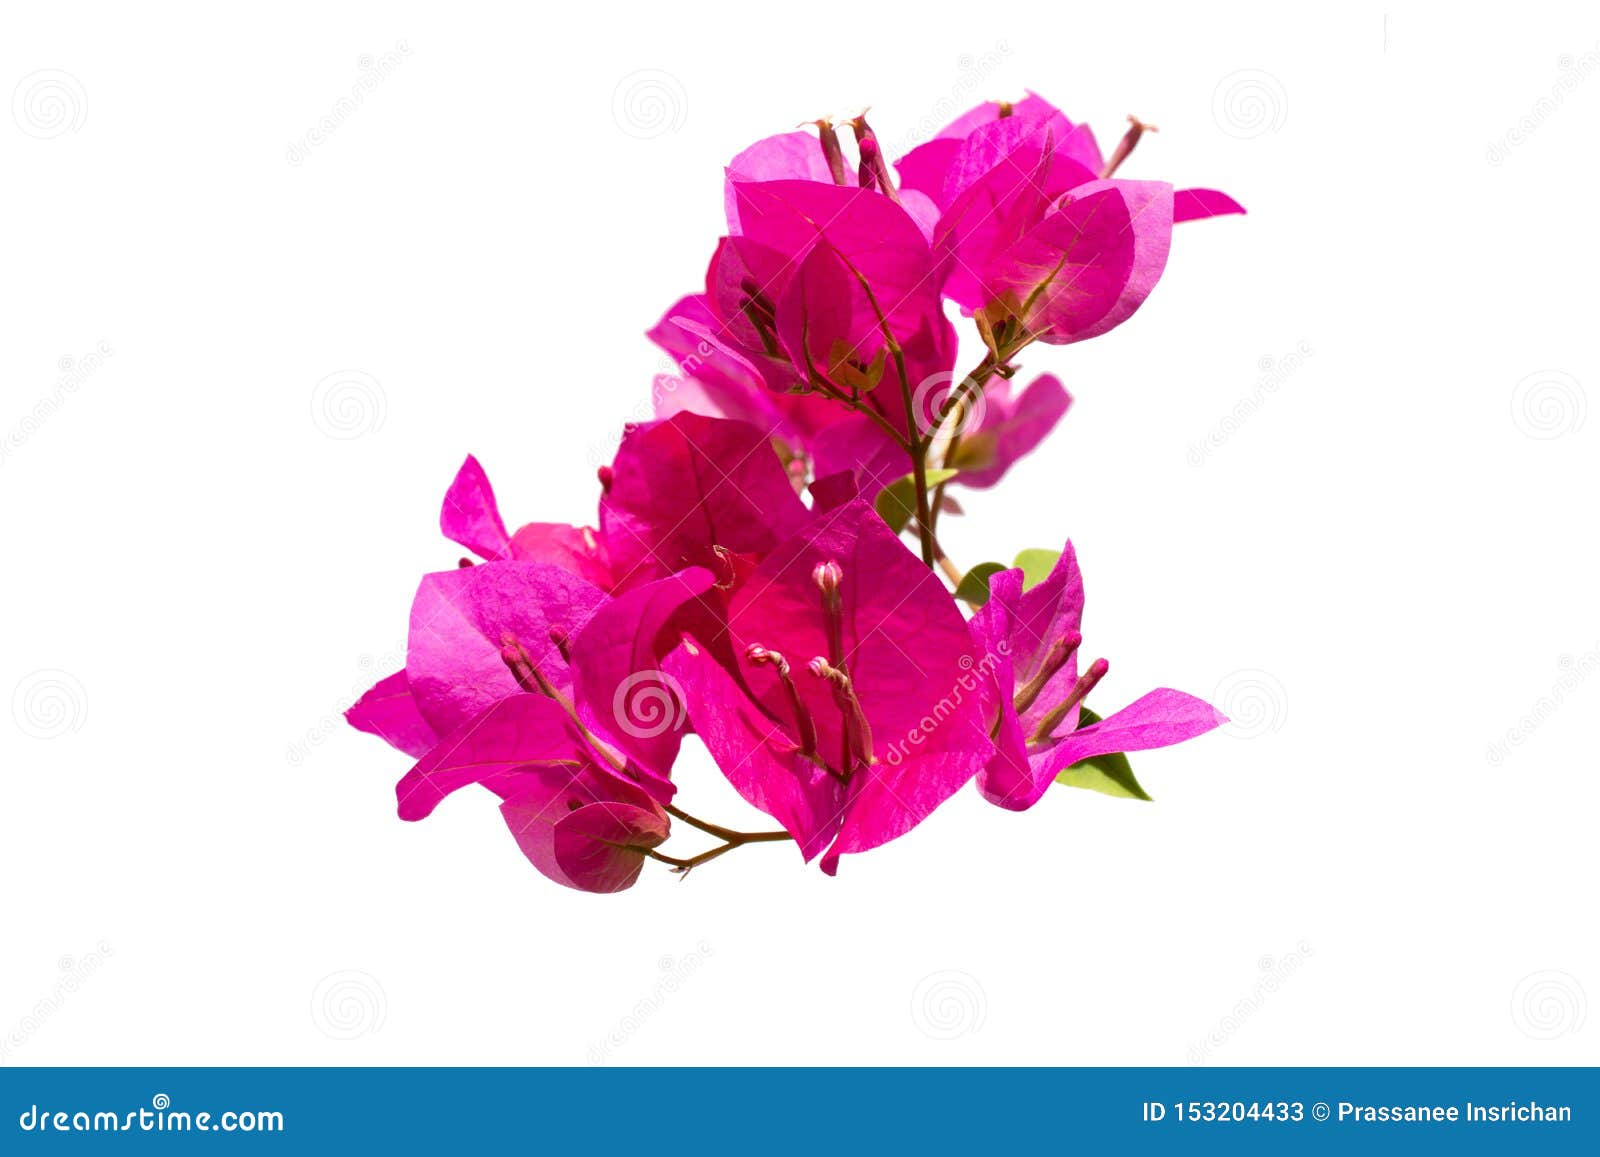 Beautiful Group Of Pink Bougainvillea Blooming With Pollen Isolated On ...